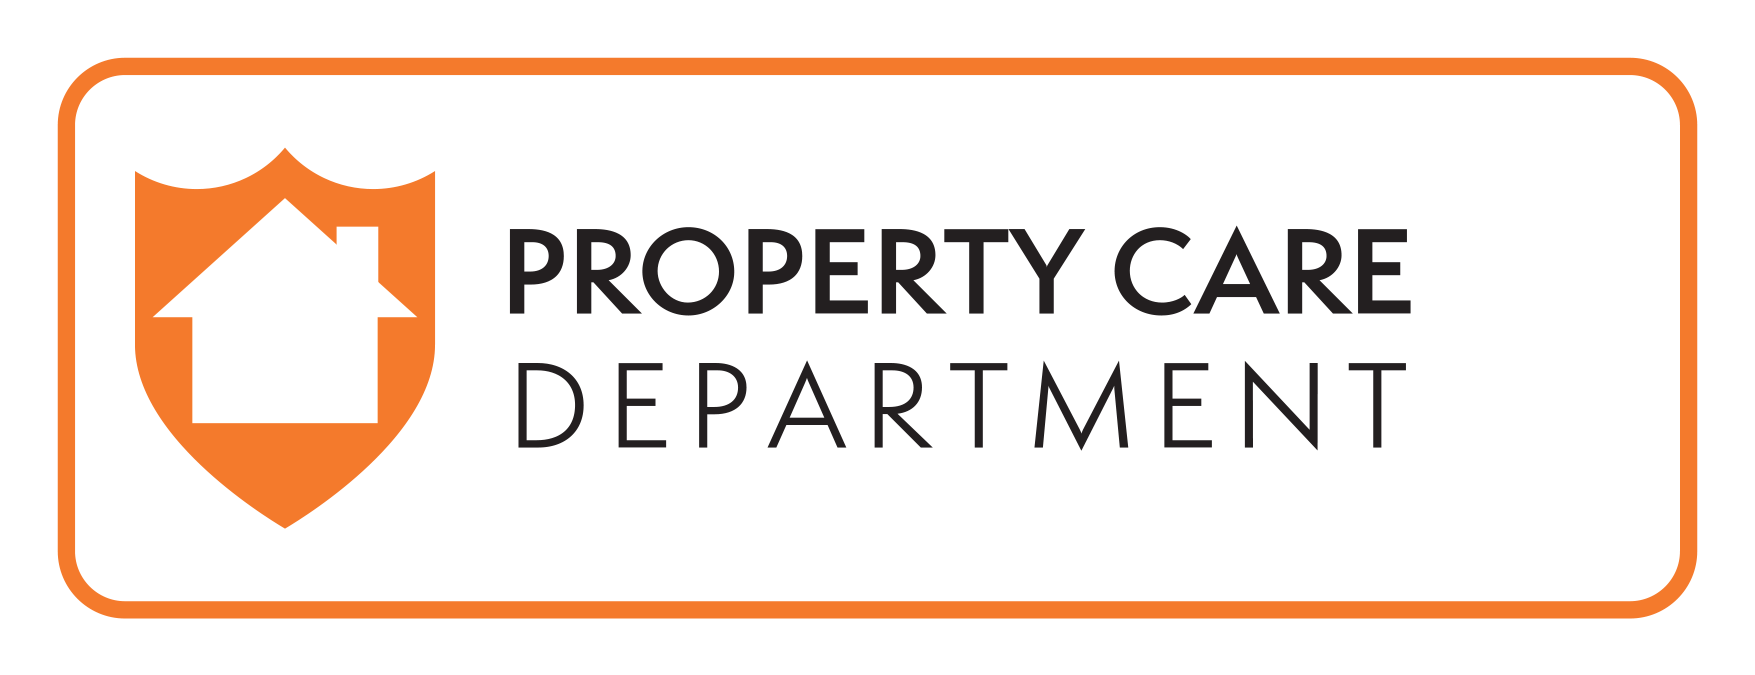 Property Care Department